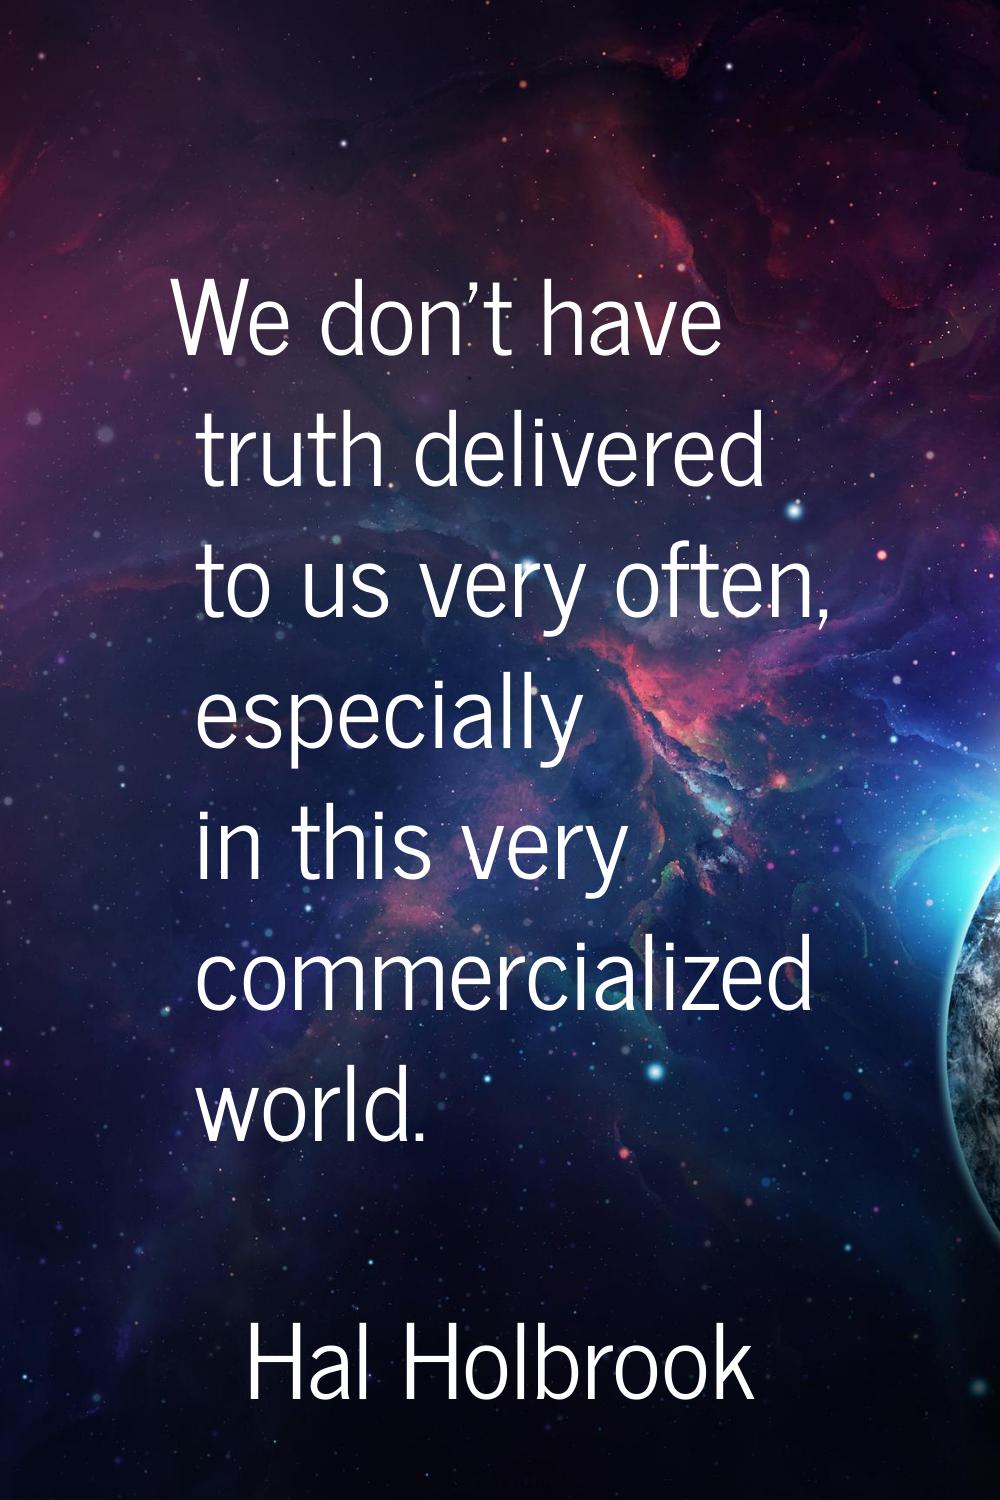 We don't have truth delivered to us very often, especially in this very commercialized world.